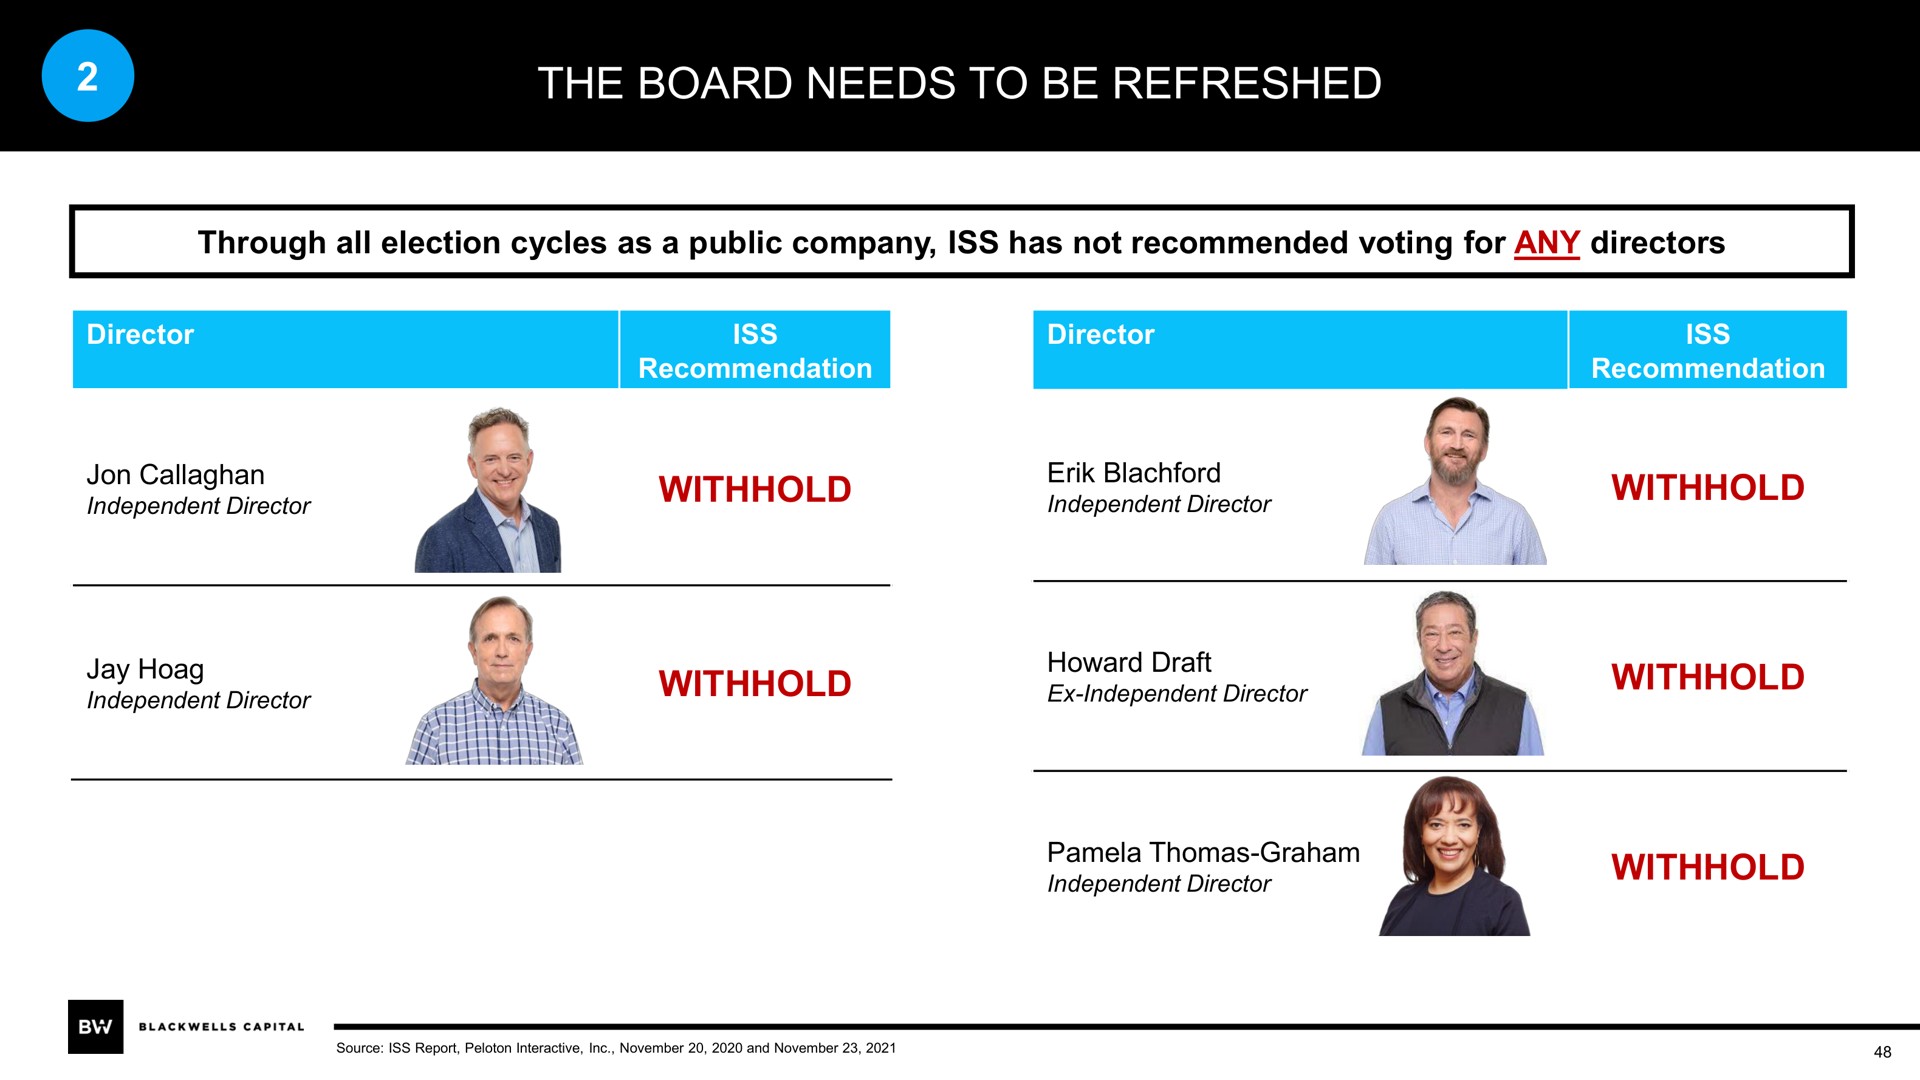 the board needs to be refreshed | Blackwells Capital